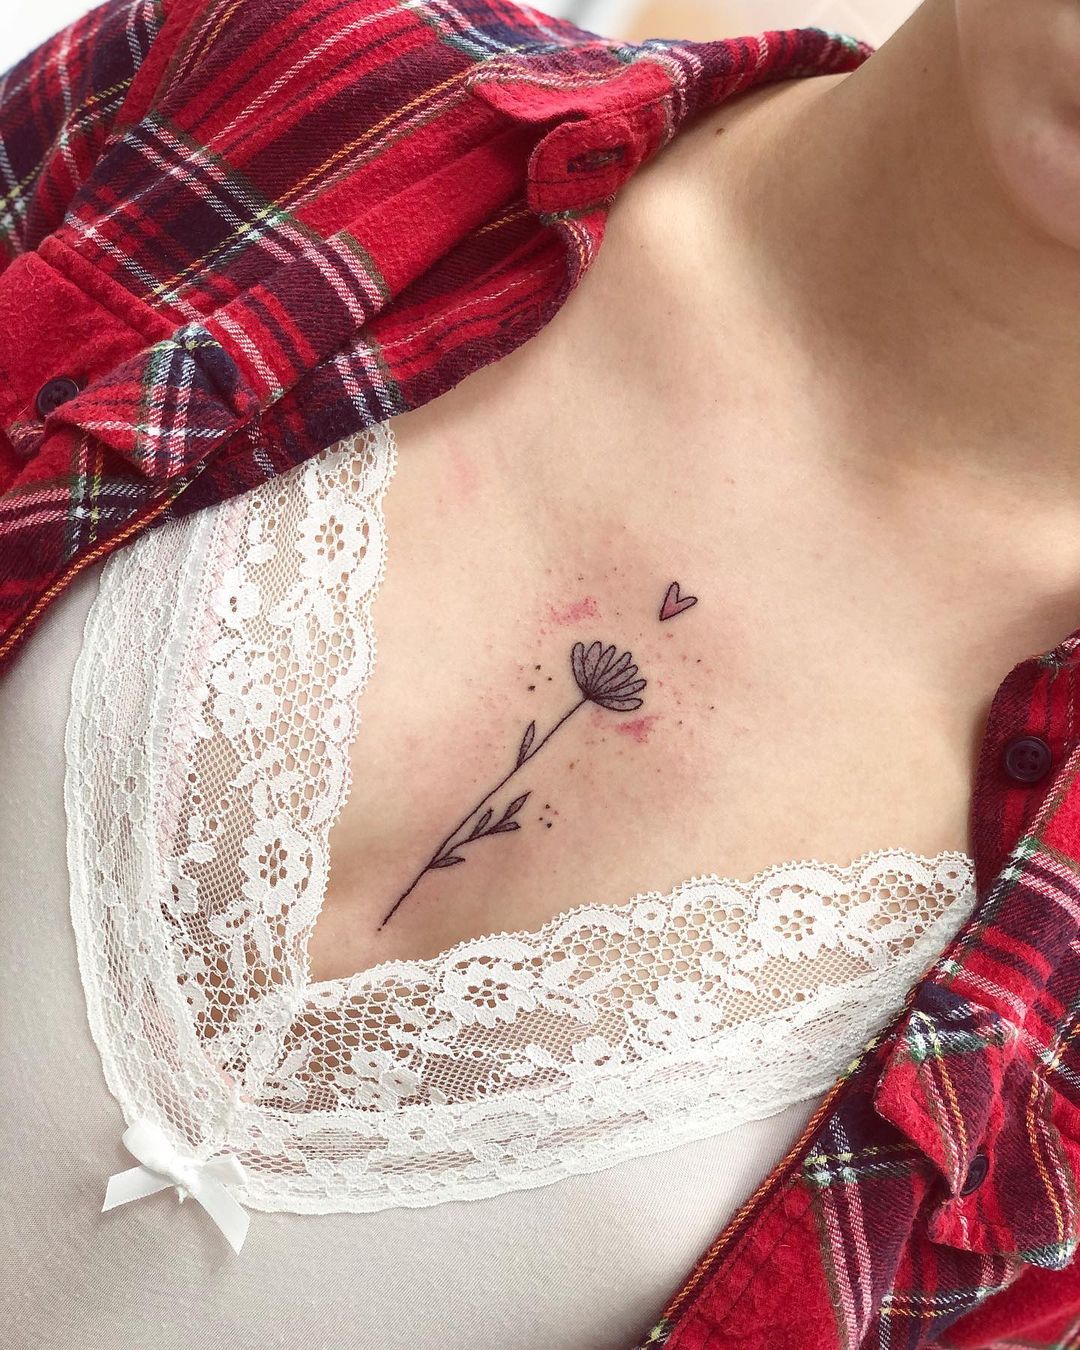 35 Tattoo Ideas That Are Simple